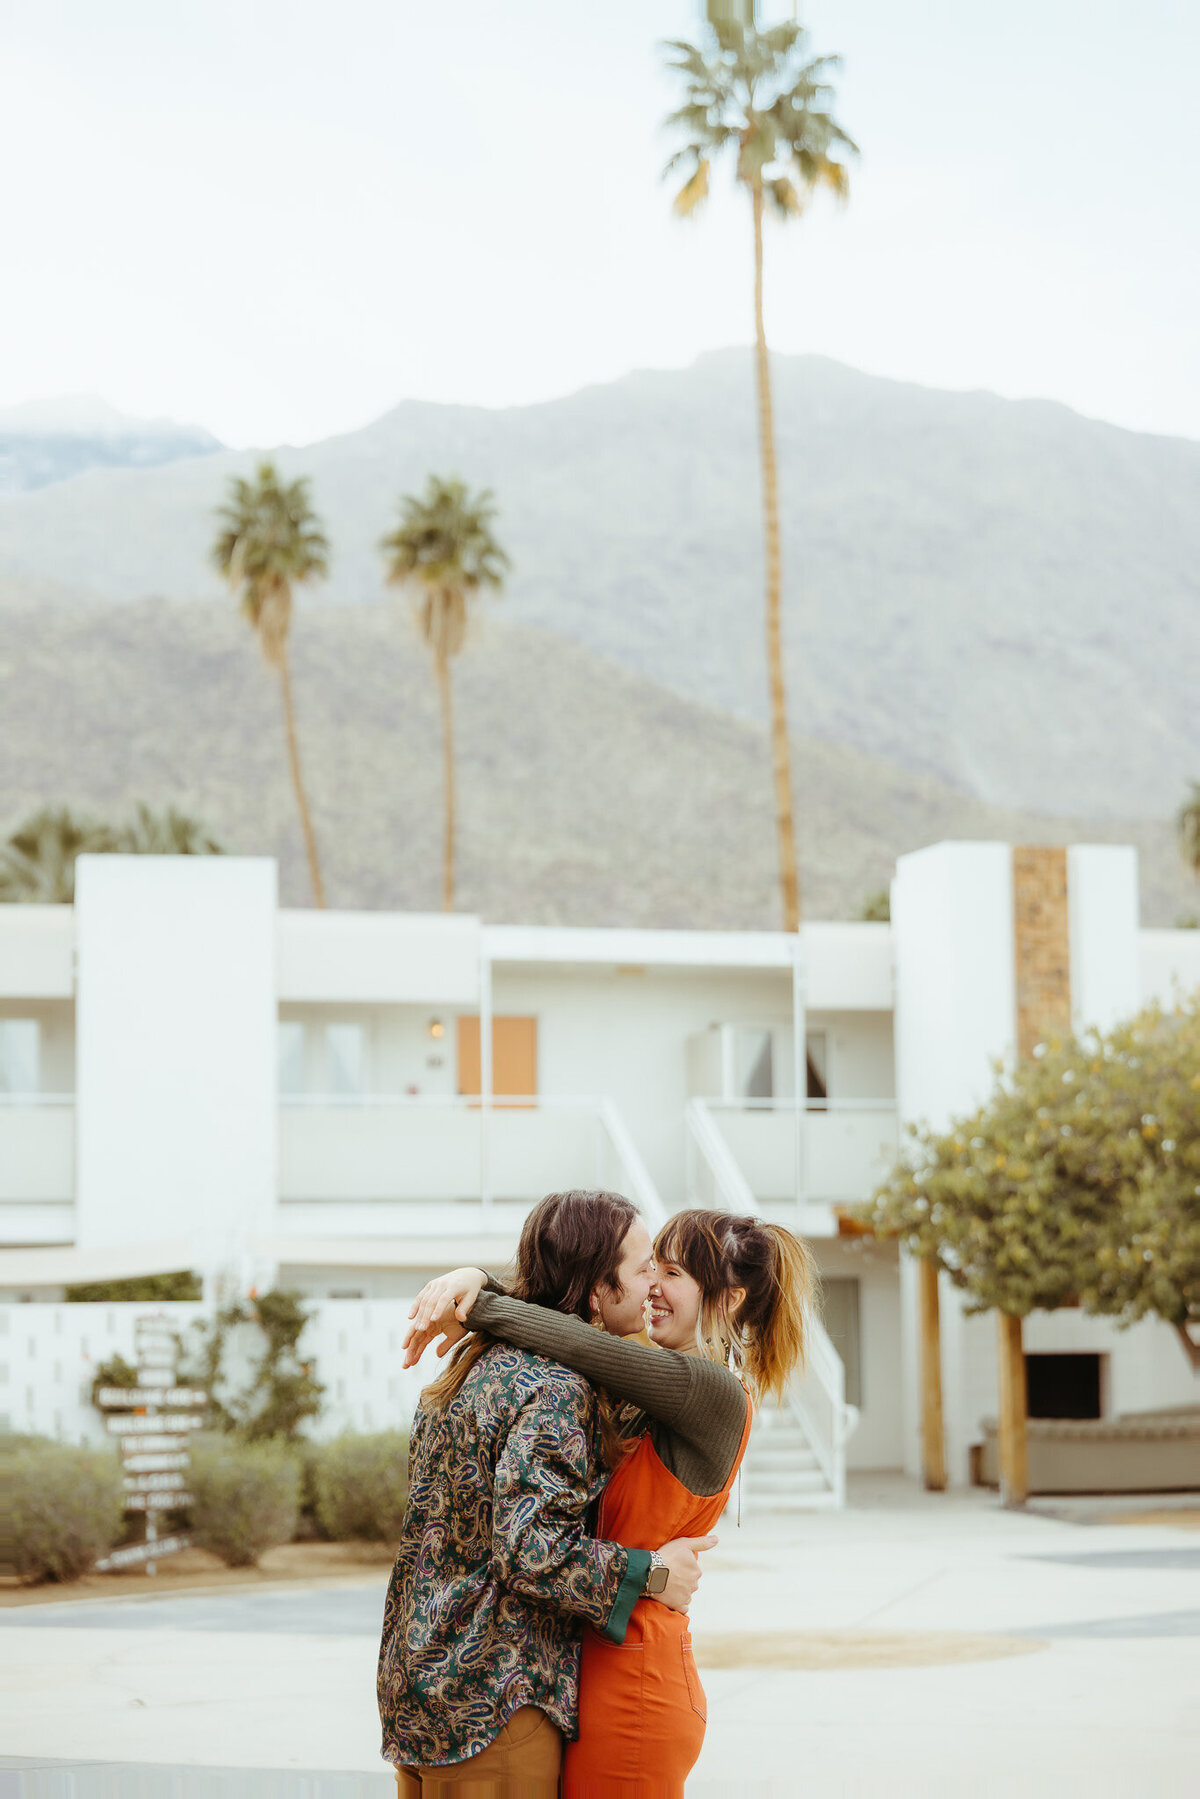 Couples photography session at Ace Hotel in Palm Springs. Woman wears orange overalls and man is in paisley teal shirt.  White hotel and palm trees in background.